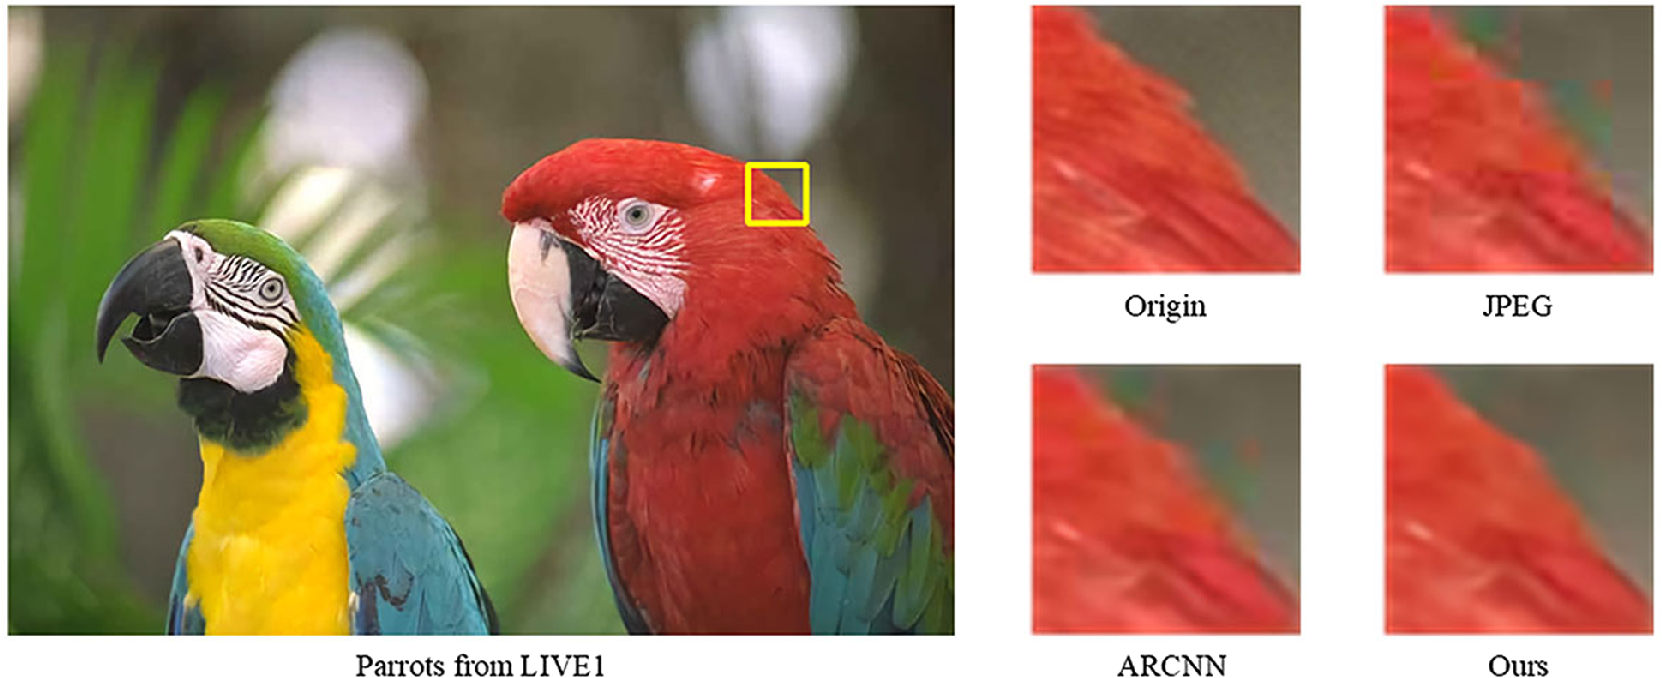 Examples of JPEG artifacts at a high compression ratio. At a high